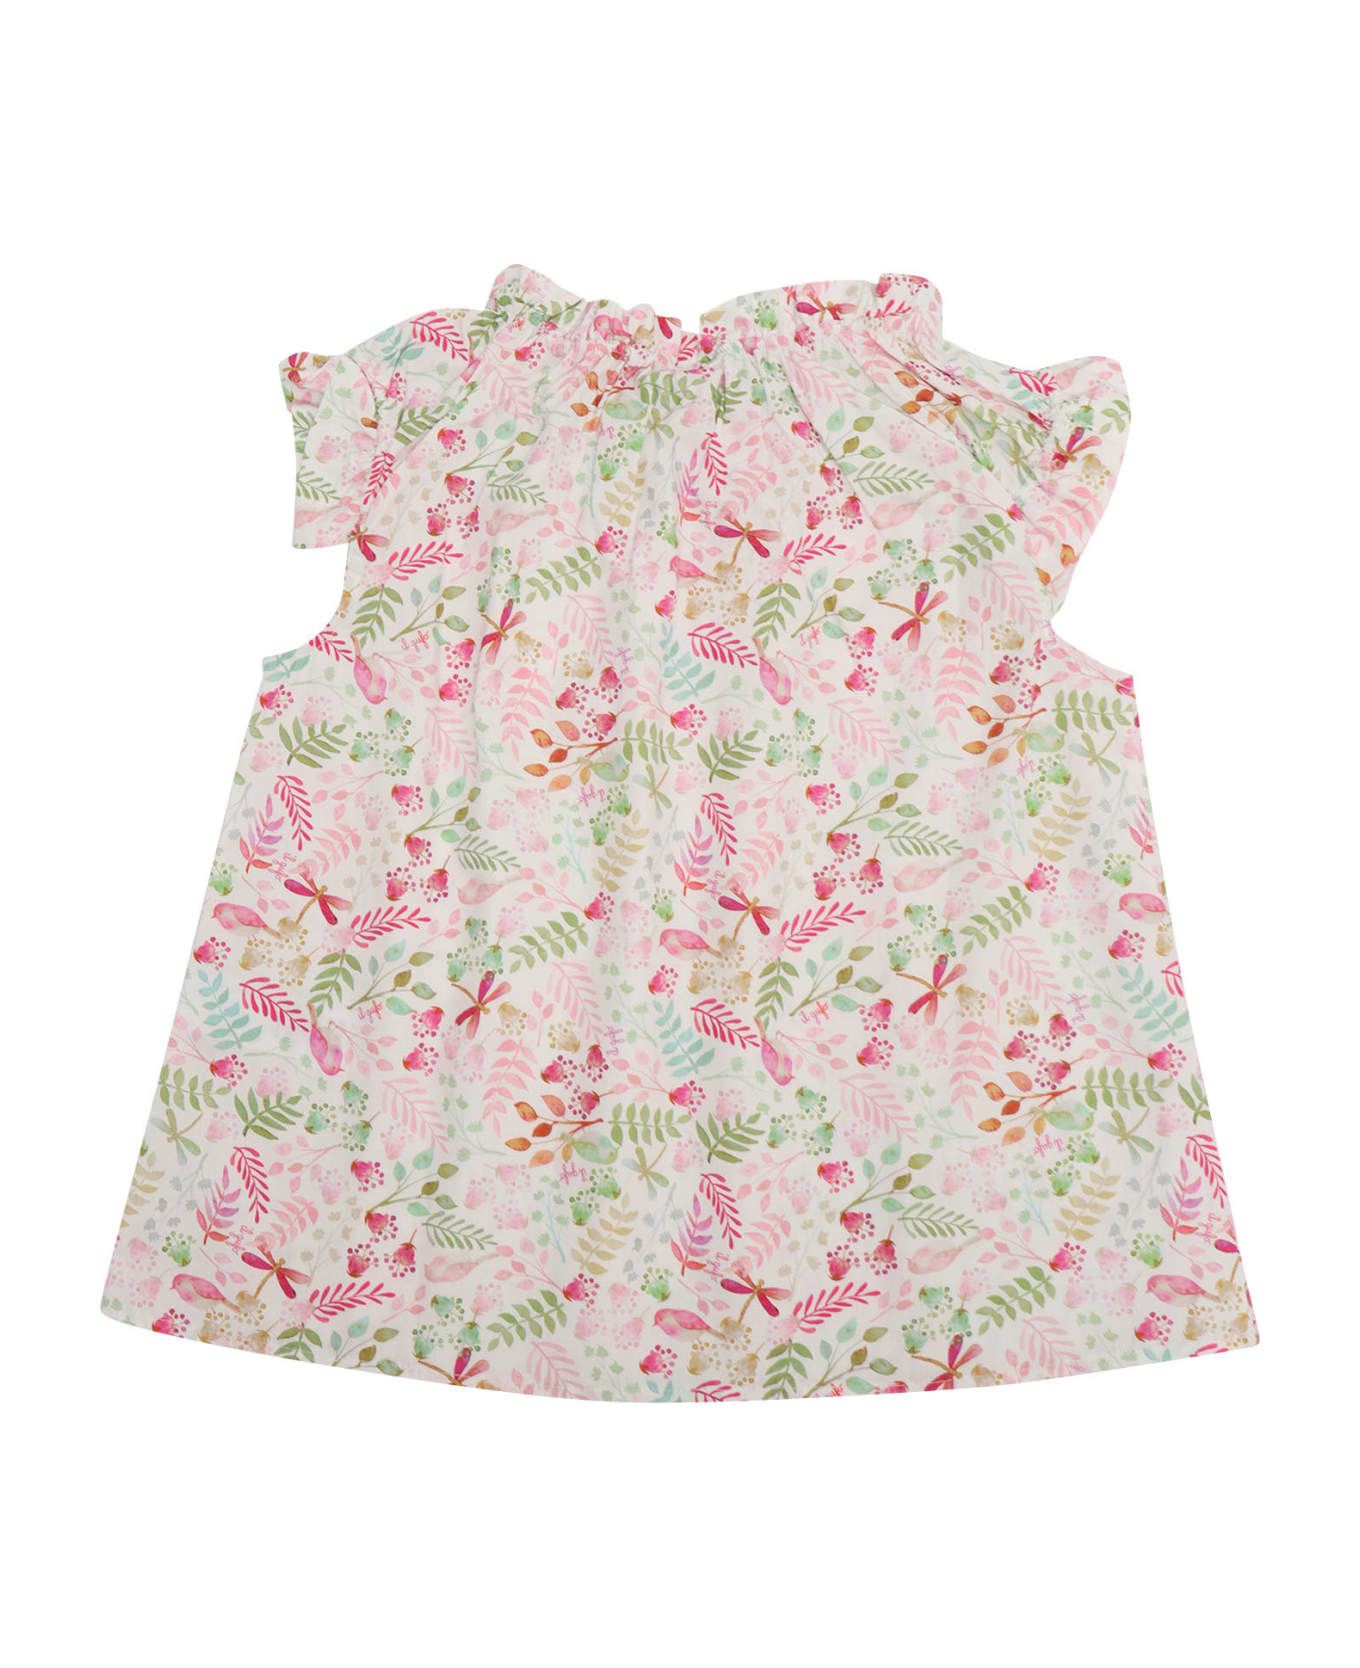 Il Gufo Floral T-shirt For Girls - PINK